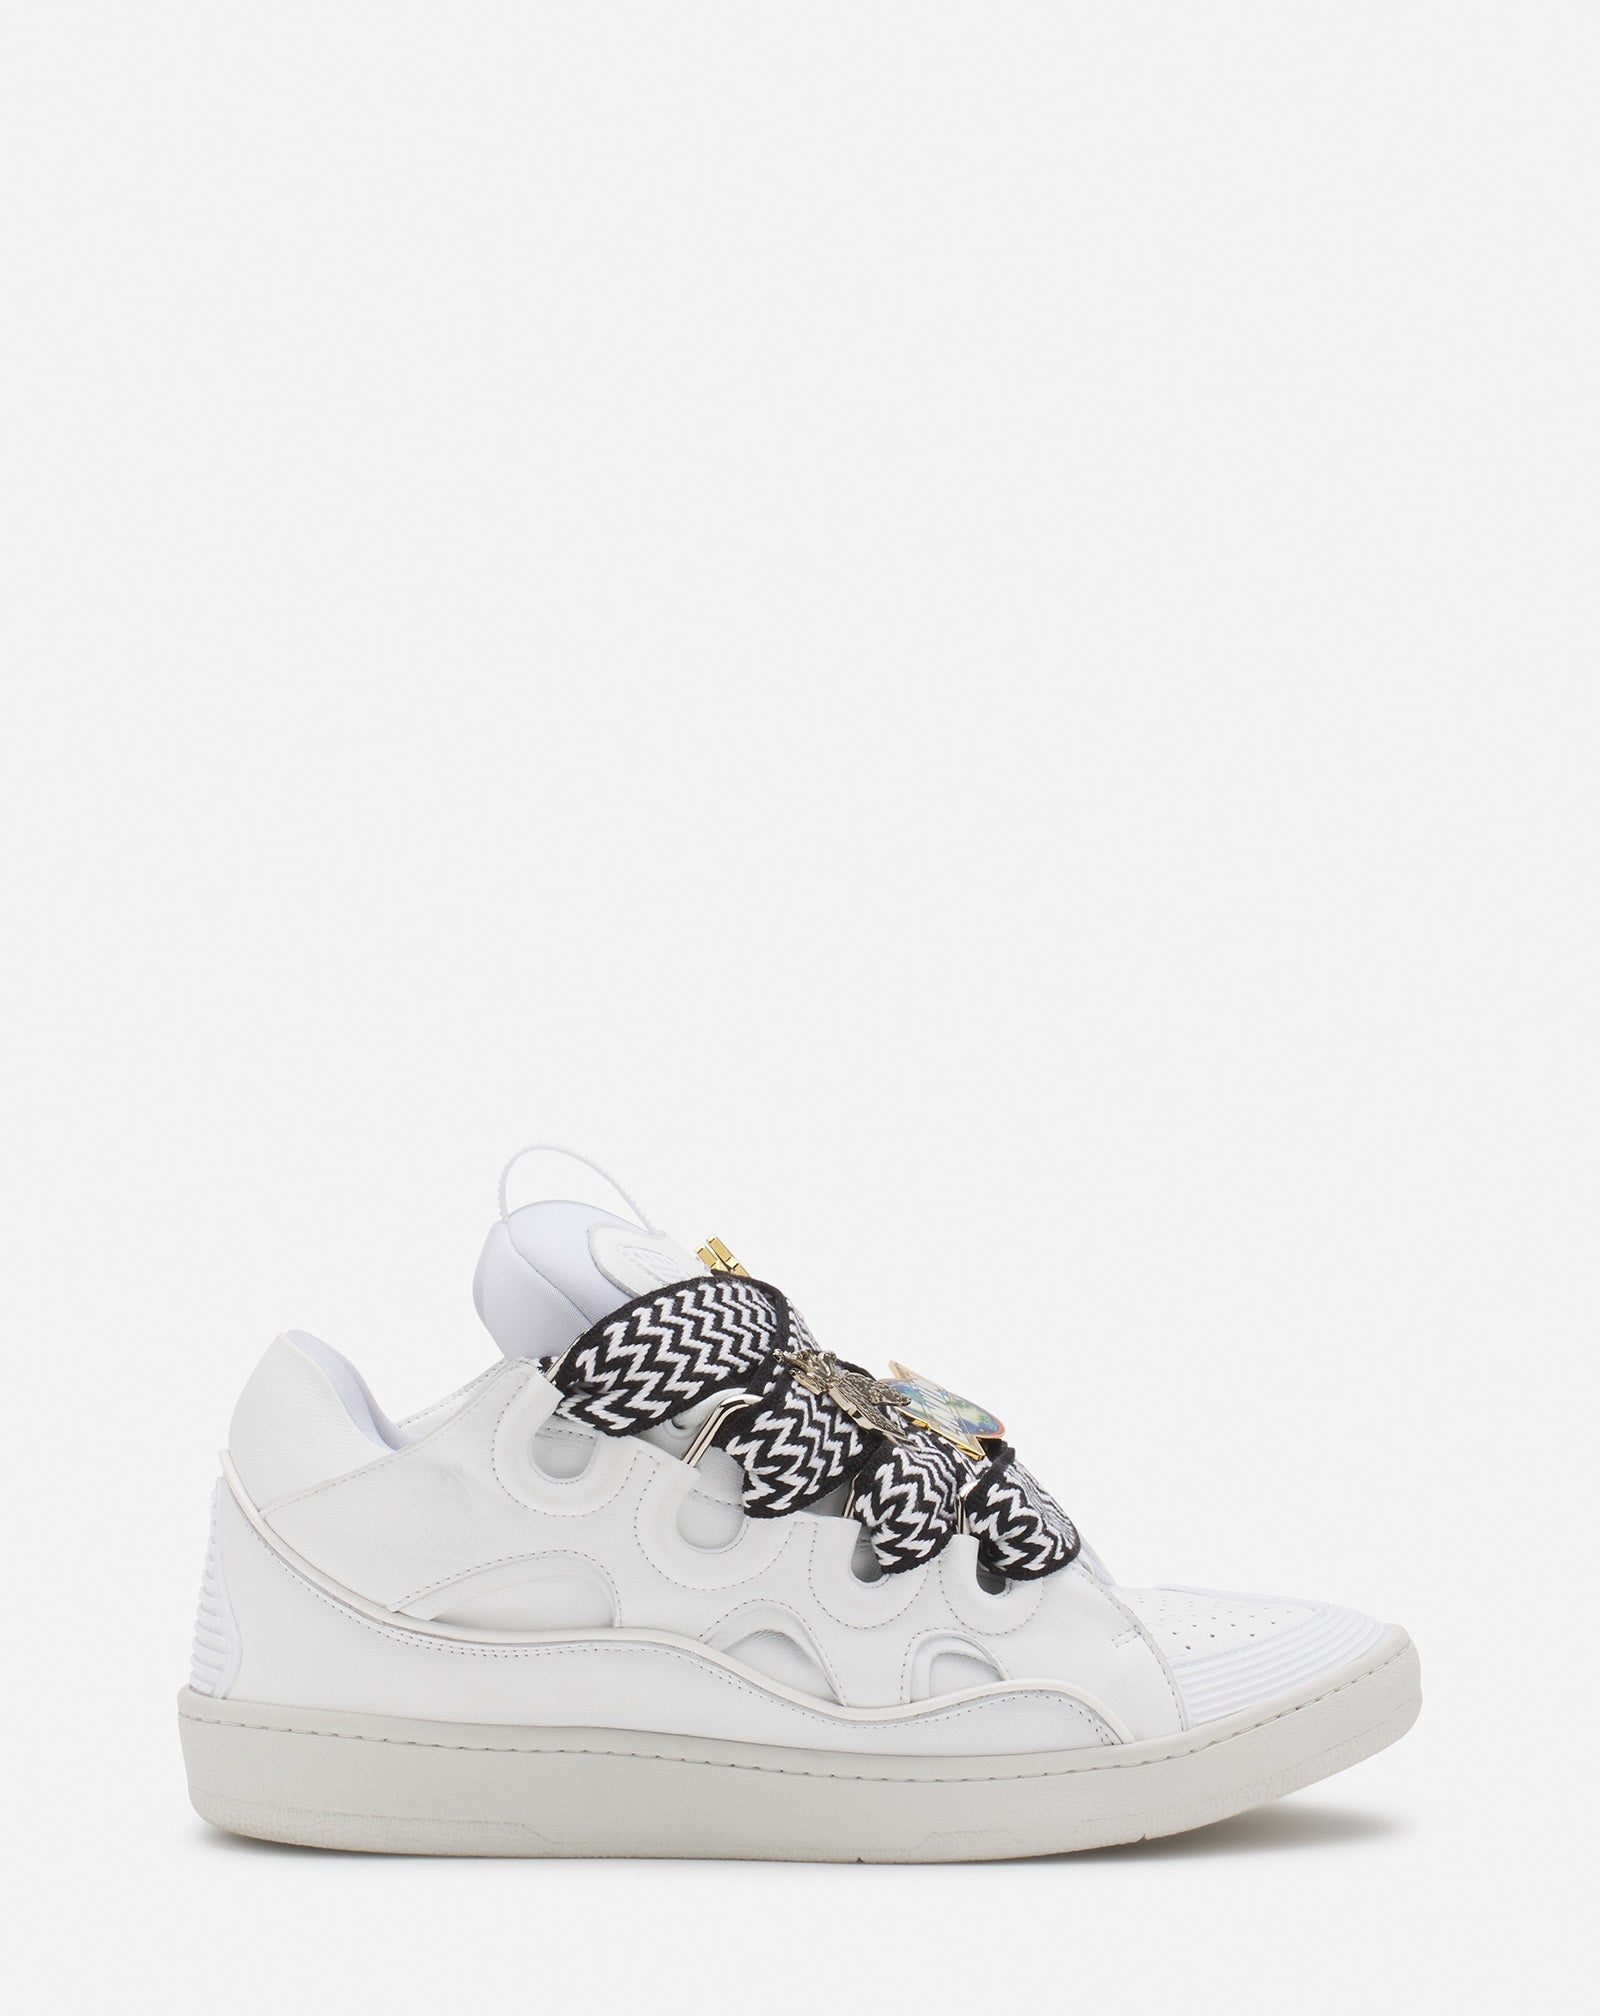 LANVIN X FUTURE CURB 3.0 LEATHER SNEAKERS FOR WOMEN - 1